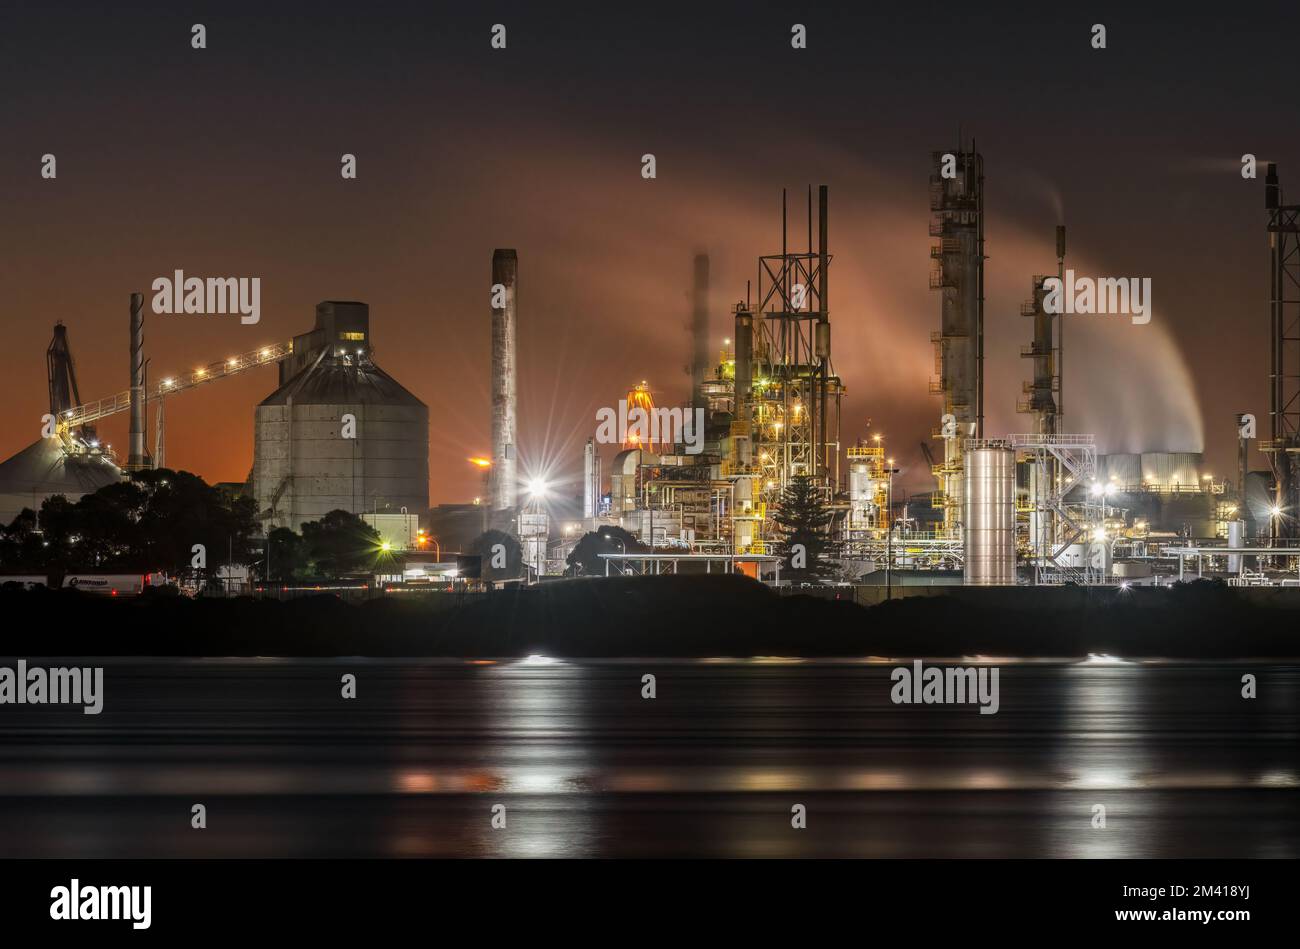 NEWCASTLE, NEW SOUTH WALES, AUSTRALIA, May 19th 2021. Image of the Orica site at kooragang working at night. Editorial use only. Stock Photo